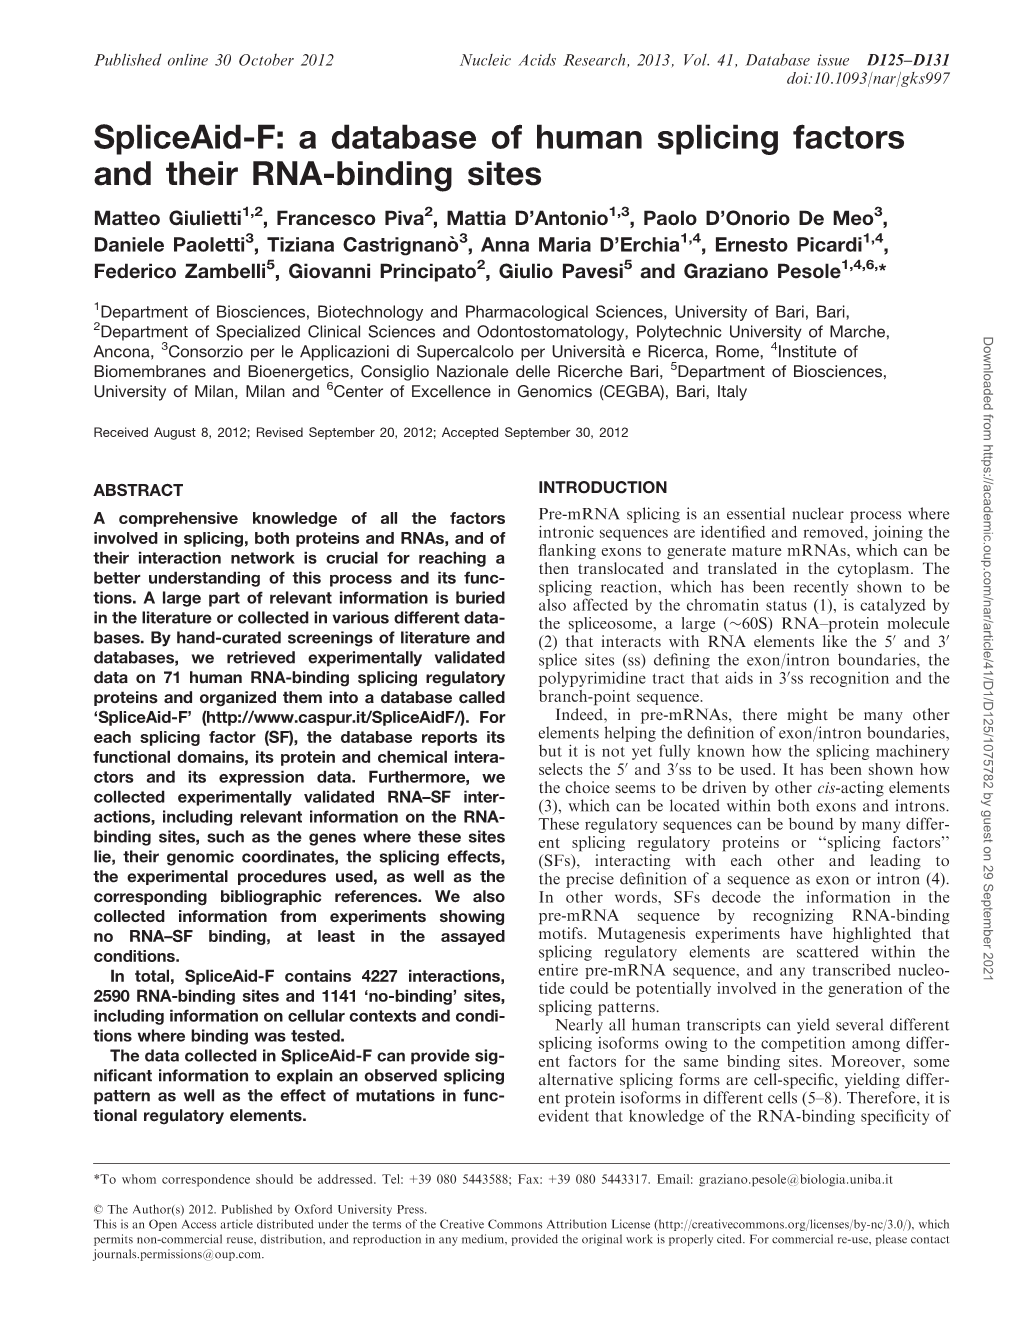 A Database of Human Splicing Factors and Their RNA-Binding Sites